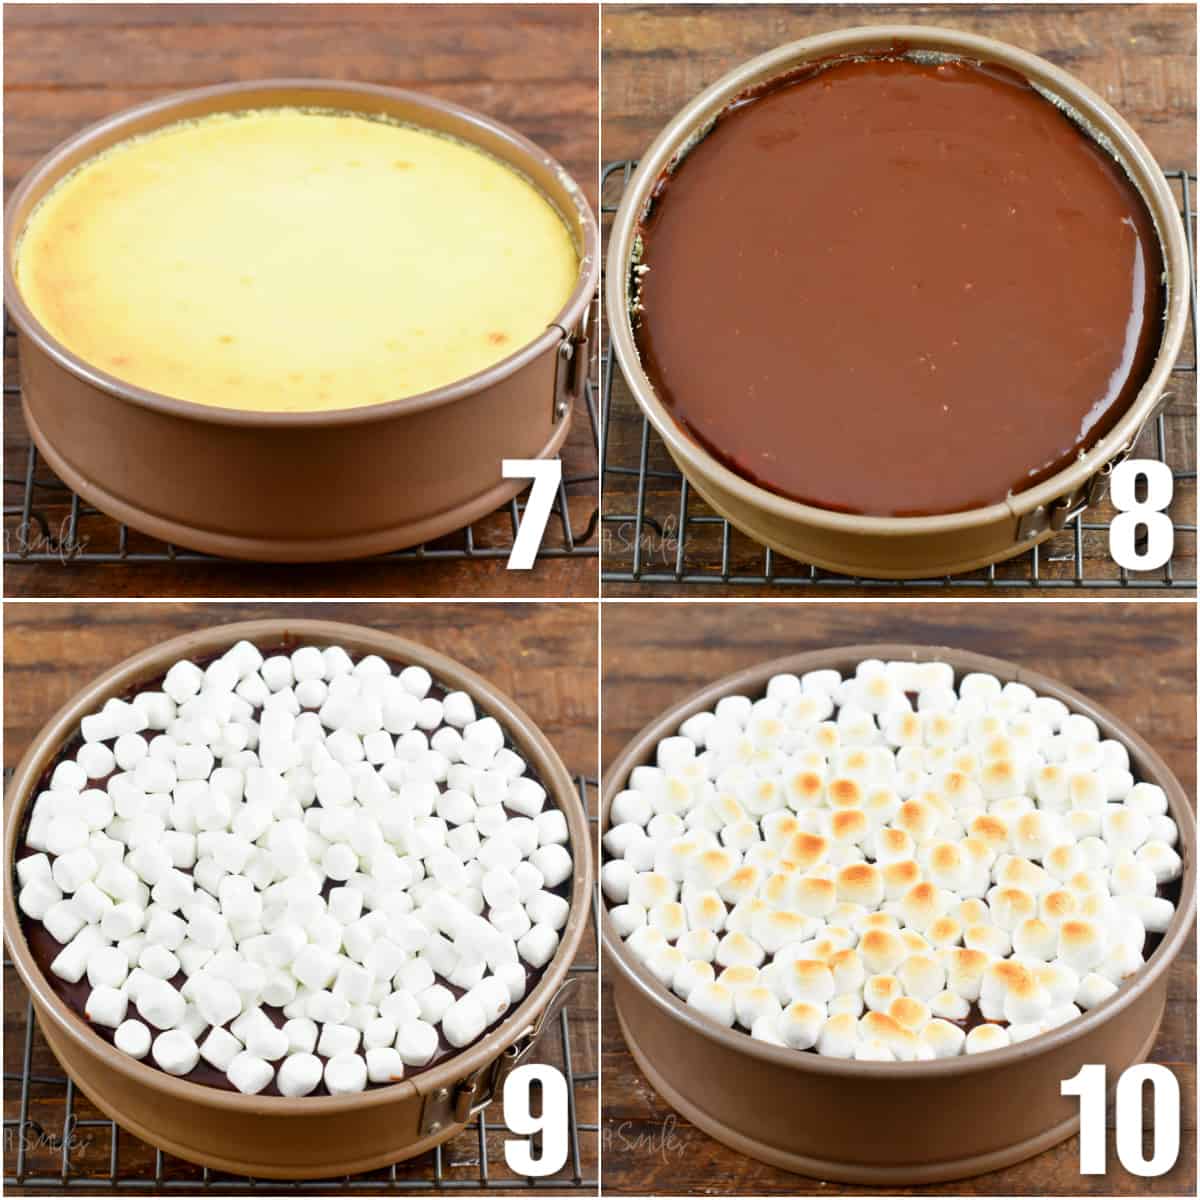 collage of four images of baked cheesecake and topping with chocolate and marshmallows.